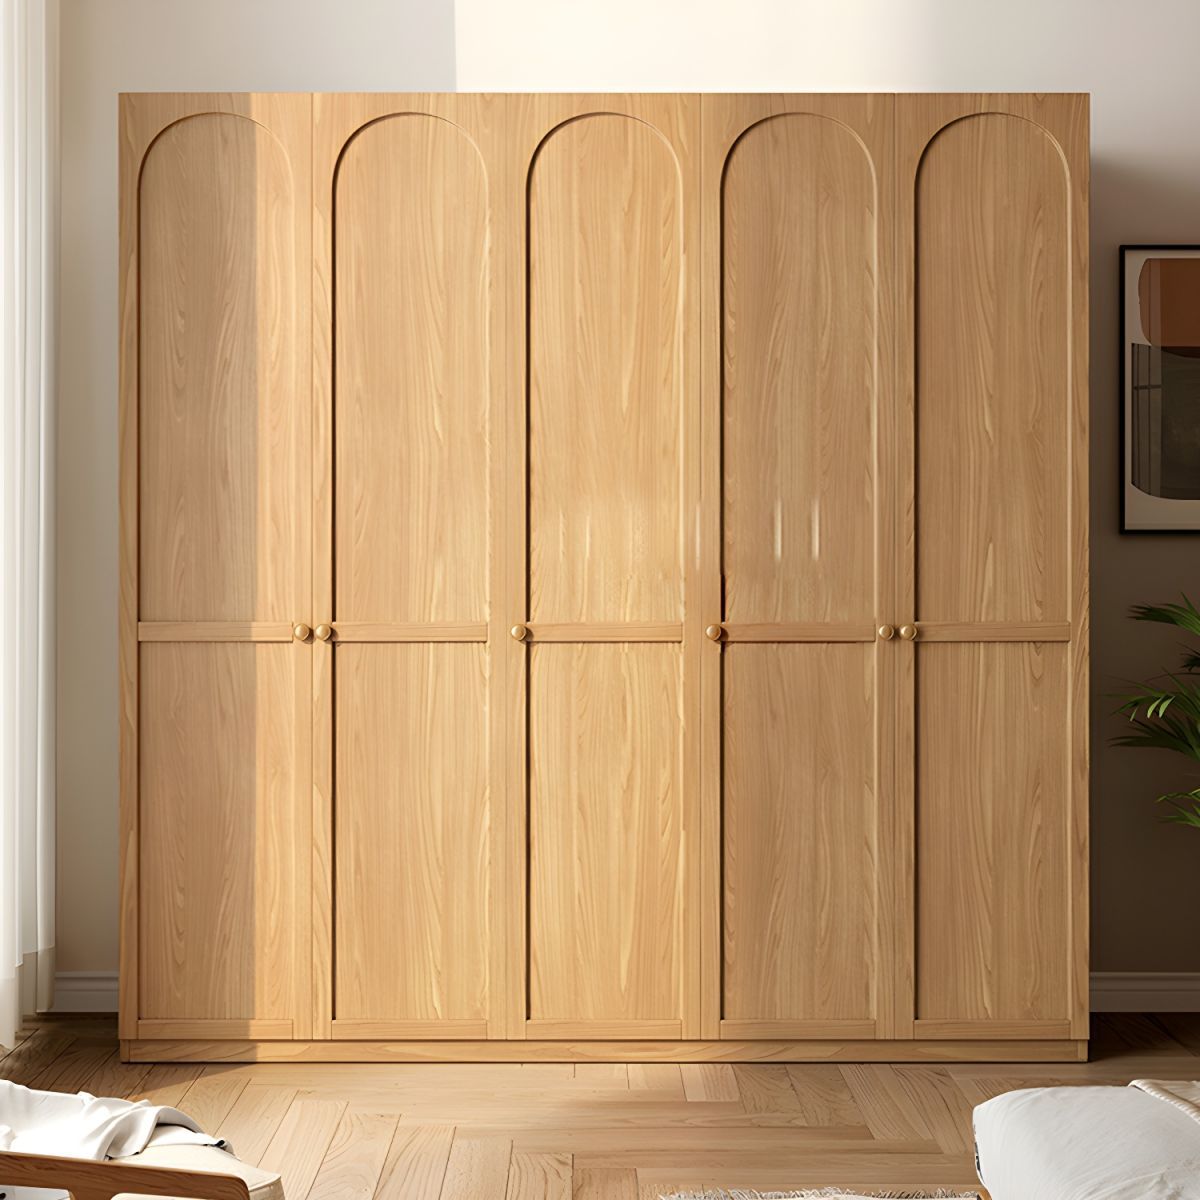 Why Pine Wardrobes are Perfect for Rustic
Home Decor